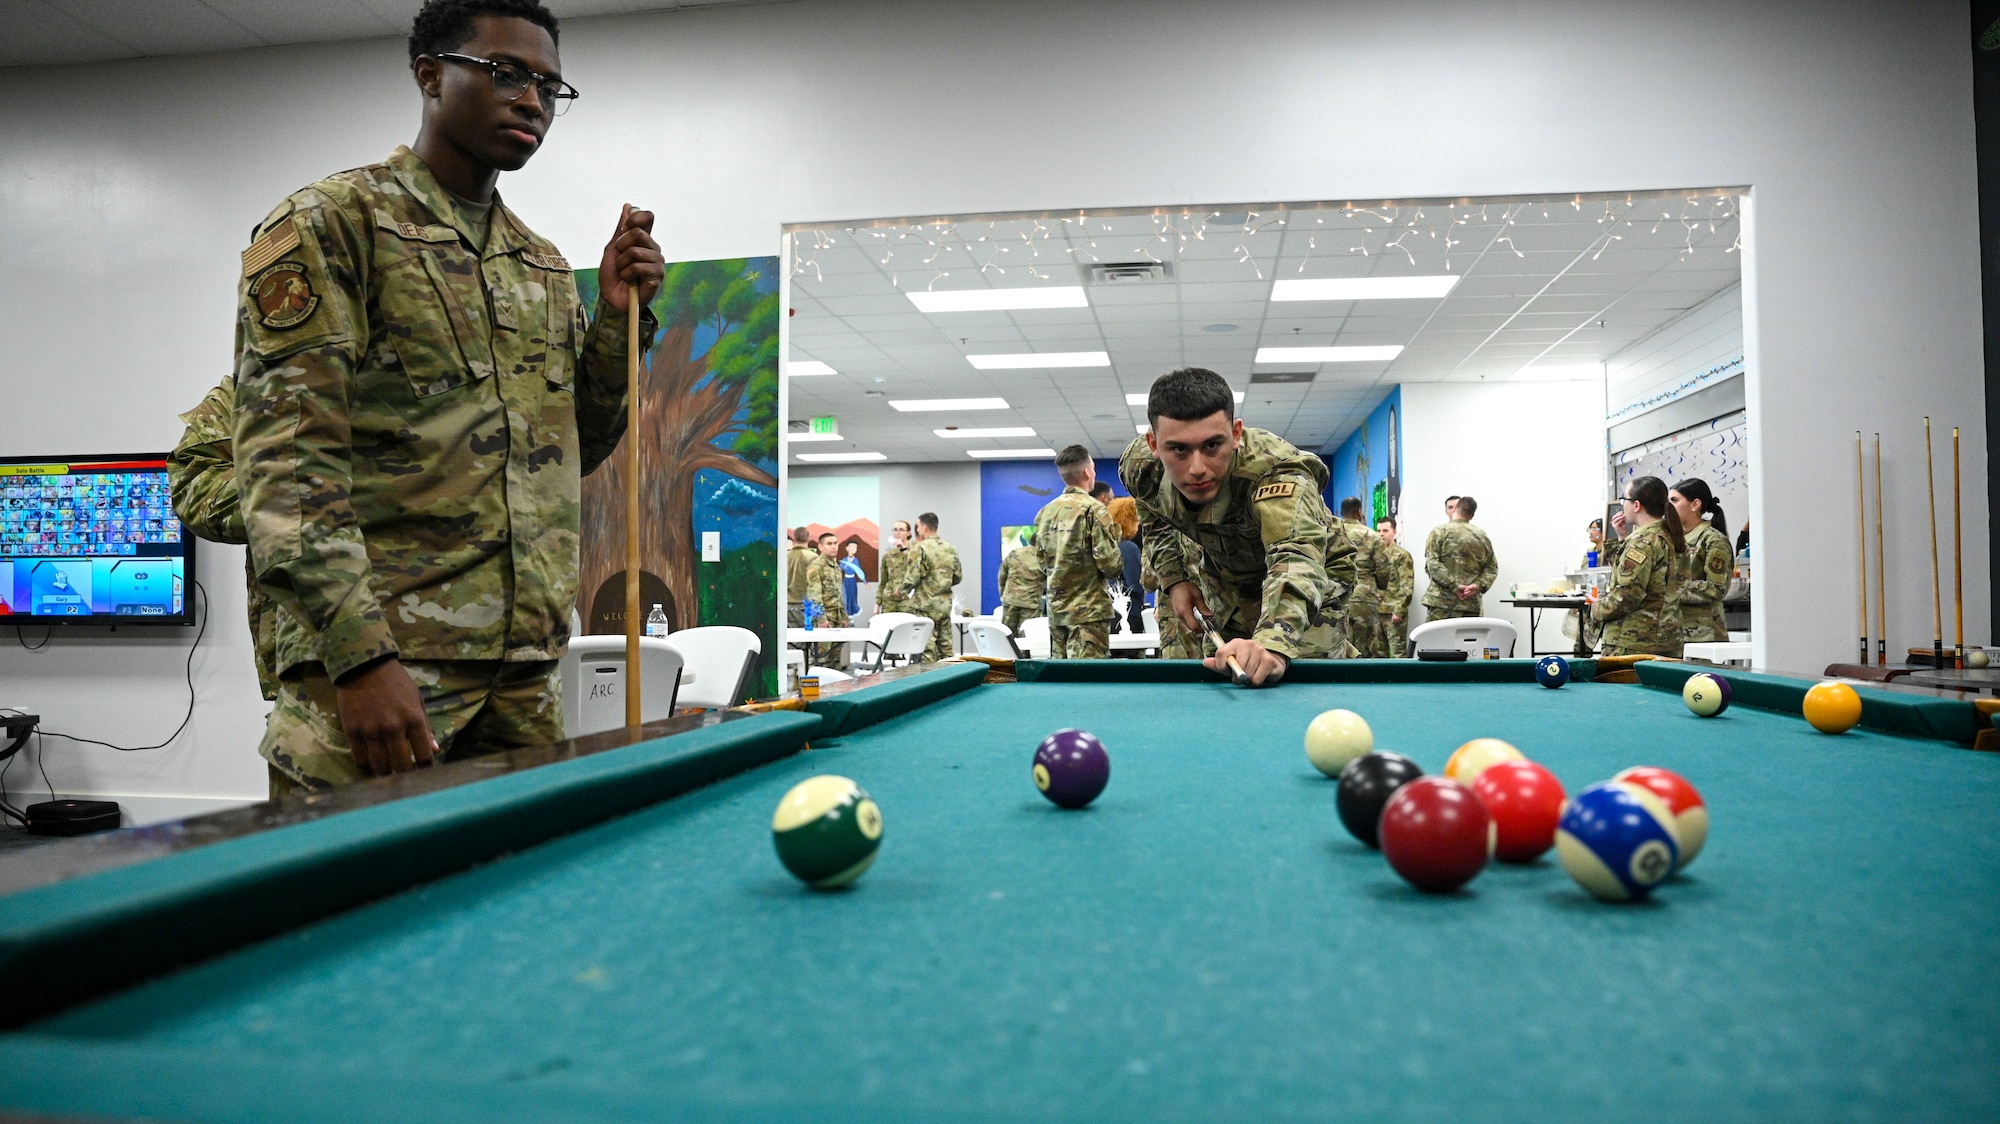 Right, Airman 1st Class Raymond Corona and Airman Cameron Deas, 75th Logistics Readiness Squadron, play pool during a grand opening of the Airman Recreation Center at Hill Air Force Base, Utah